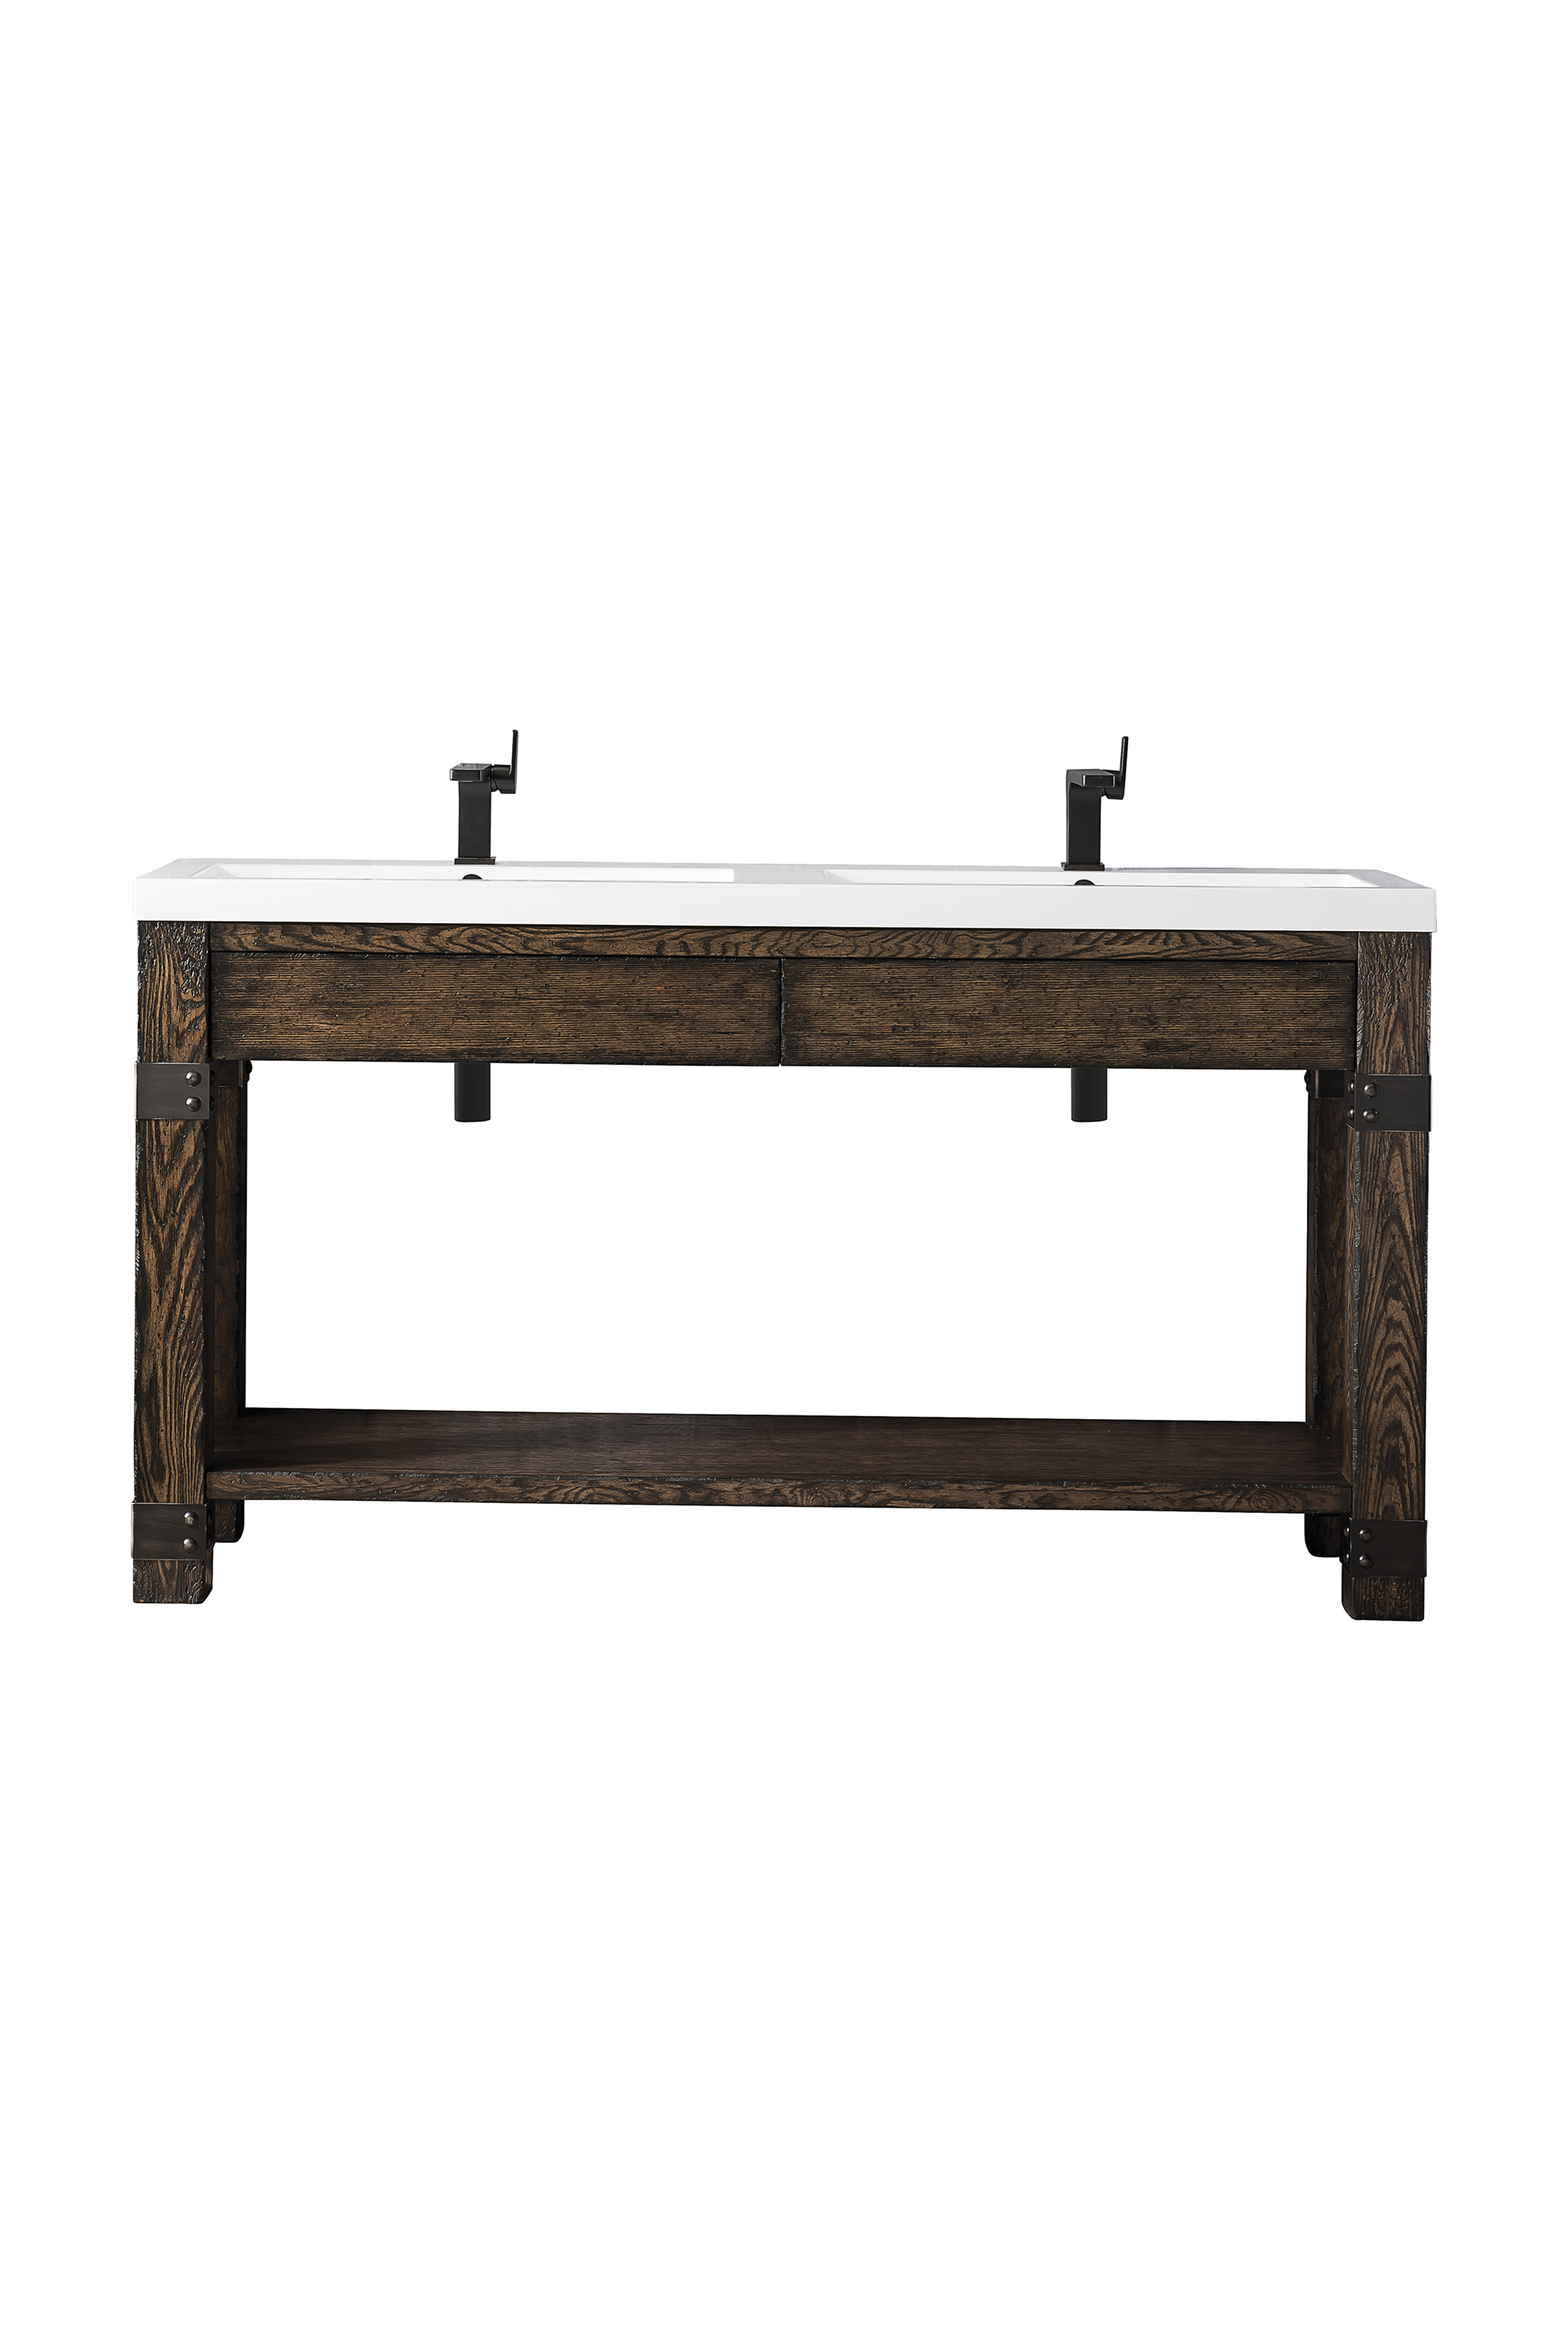 James Martin C205V63RSAWG Brooklyn 63" Wooden Sink Console, Rustic Ash w/ White Glossy Composite Countertop - Click Image to Close